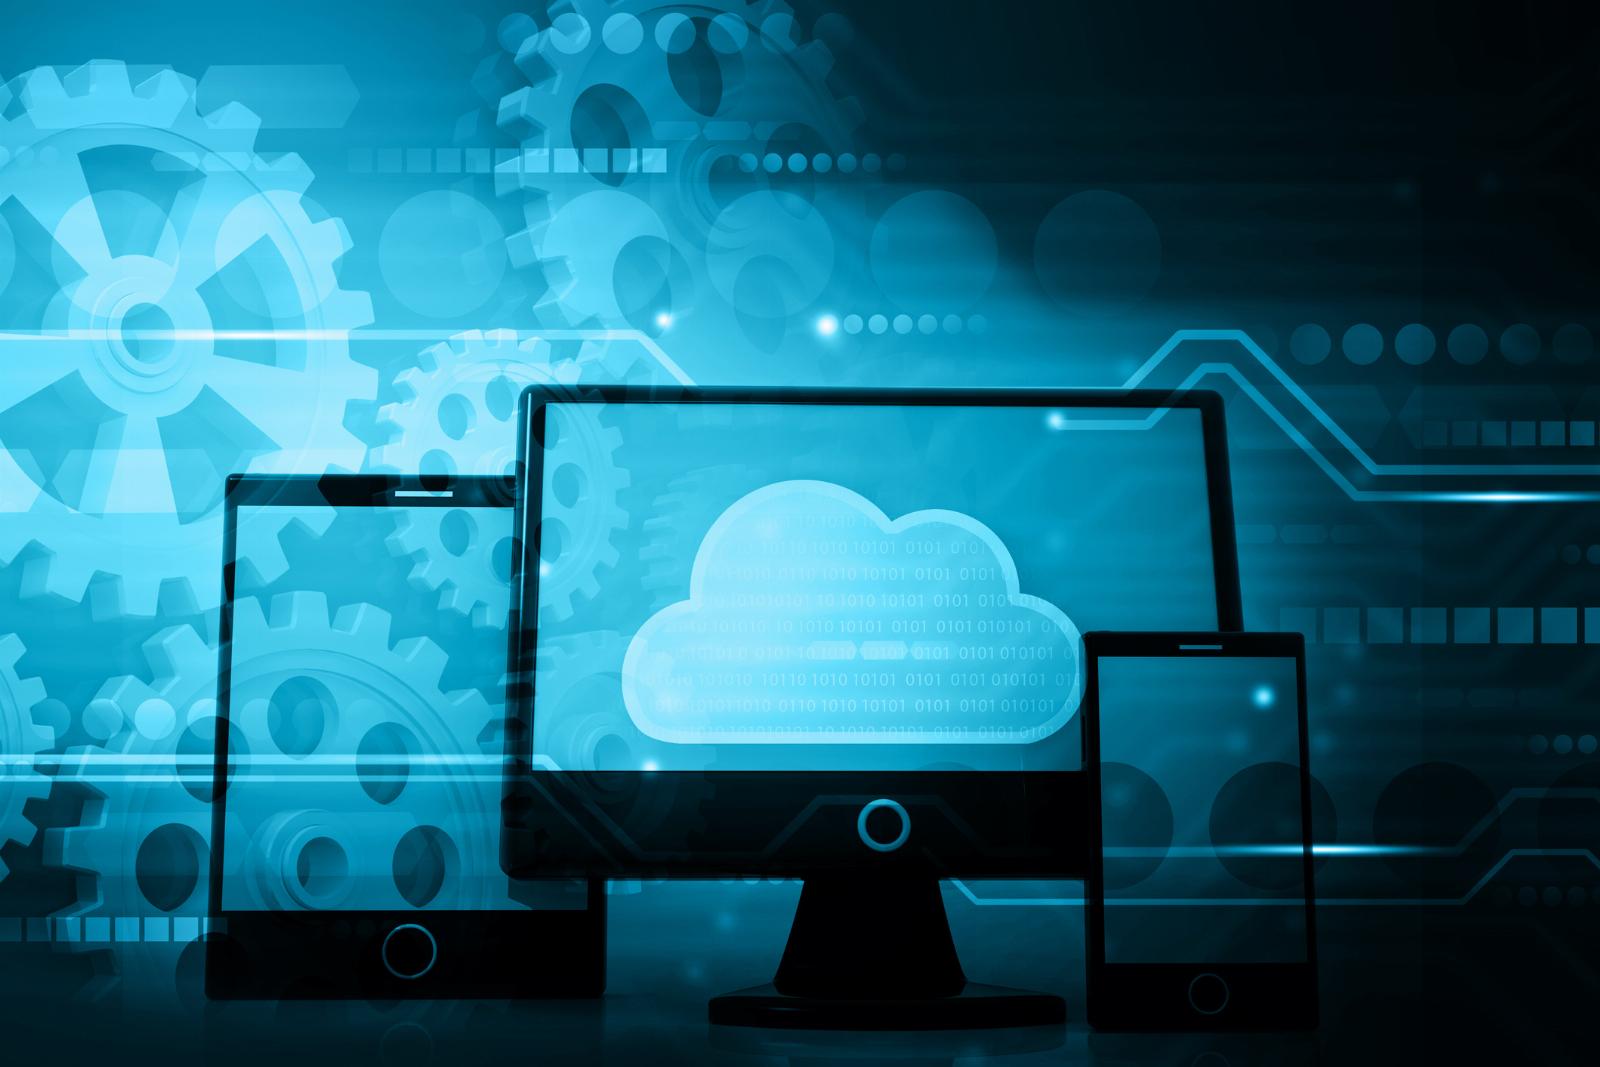 Sentra raises $30M to provide a security layer for data in the cloud